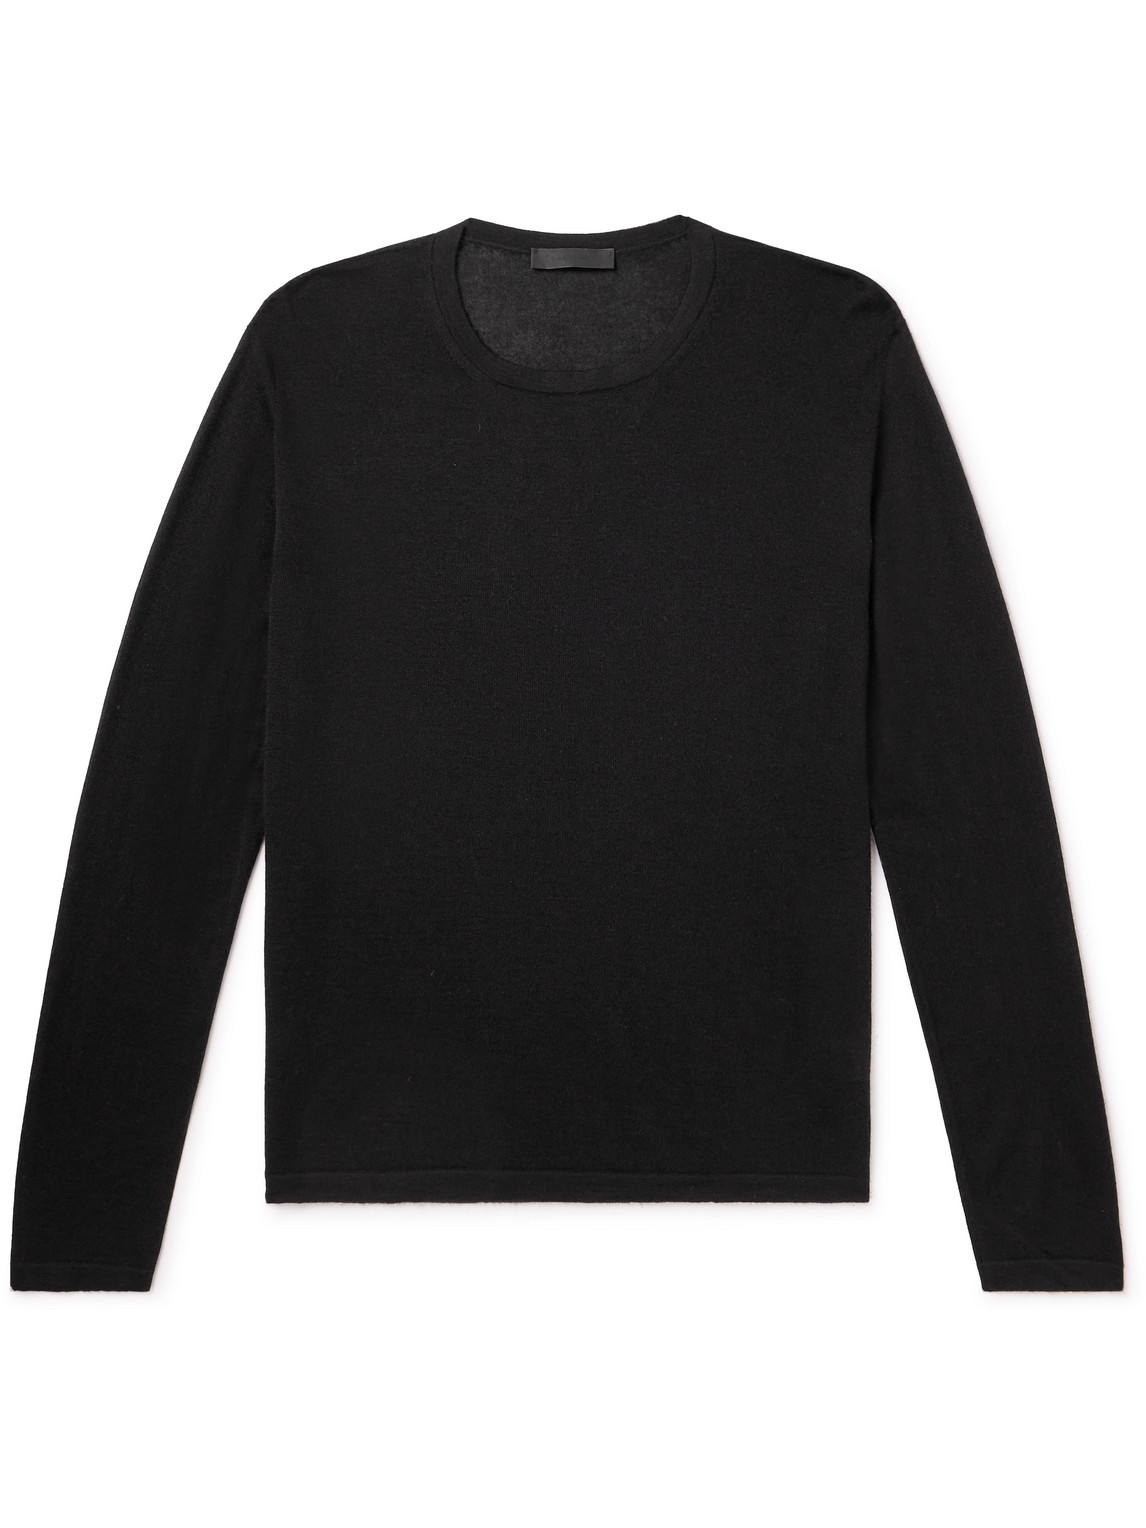 Saman Amel Cashmere And Silk-blend Sweater In Black